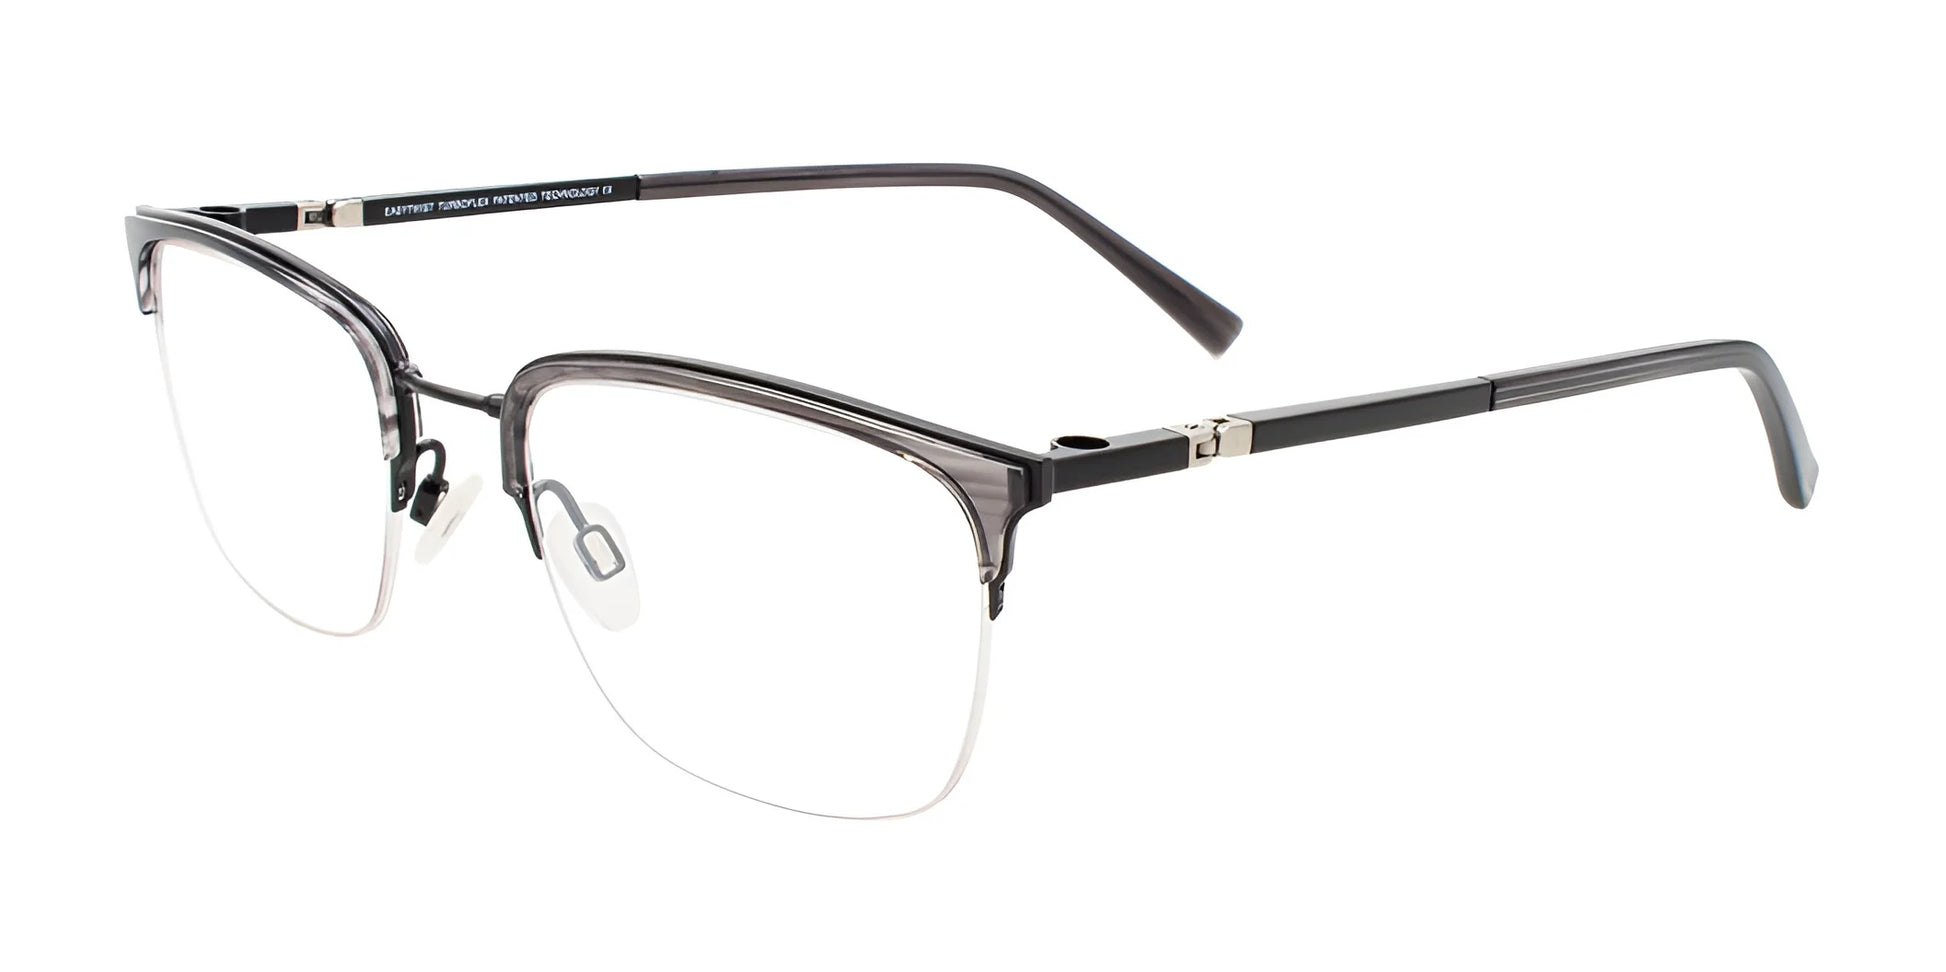 Clip & Twist CT276 Eyeglasses with Clip-on Sunglasses Black & Grey Striped